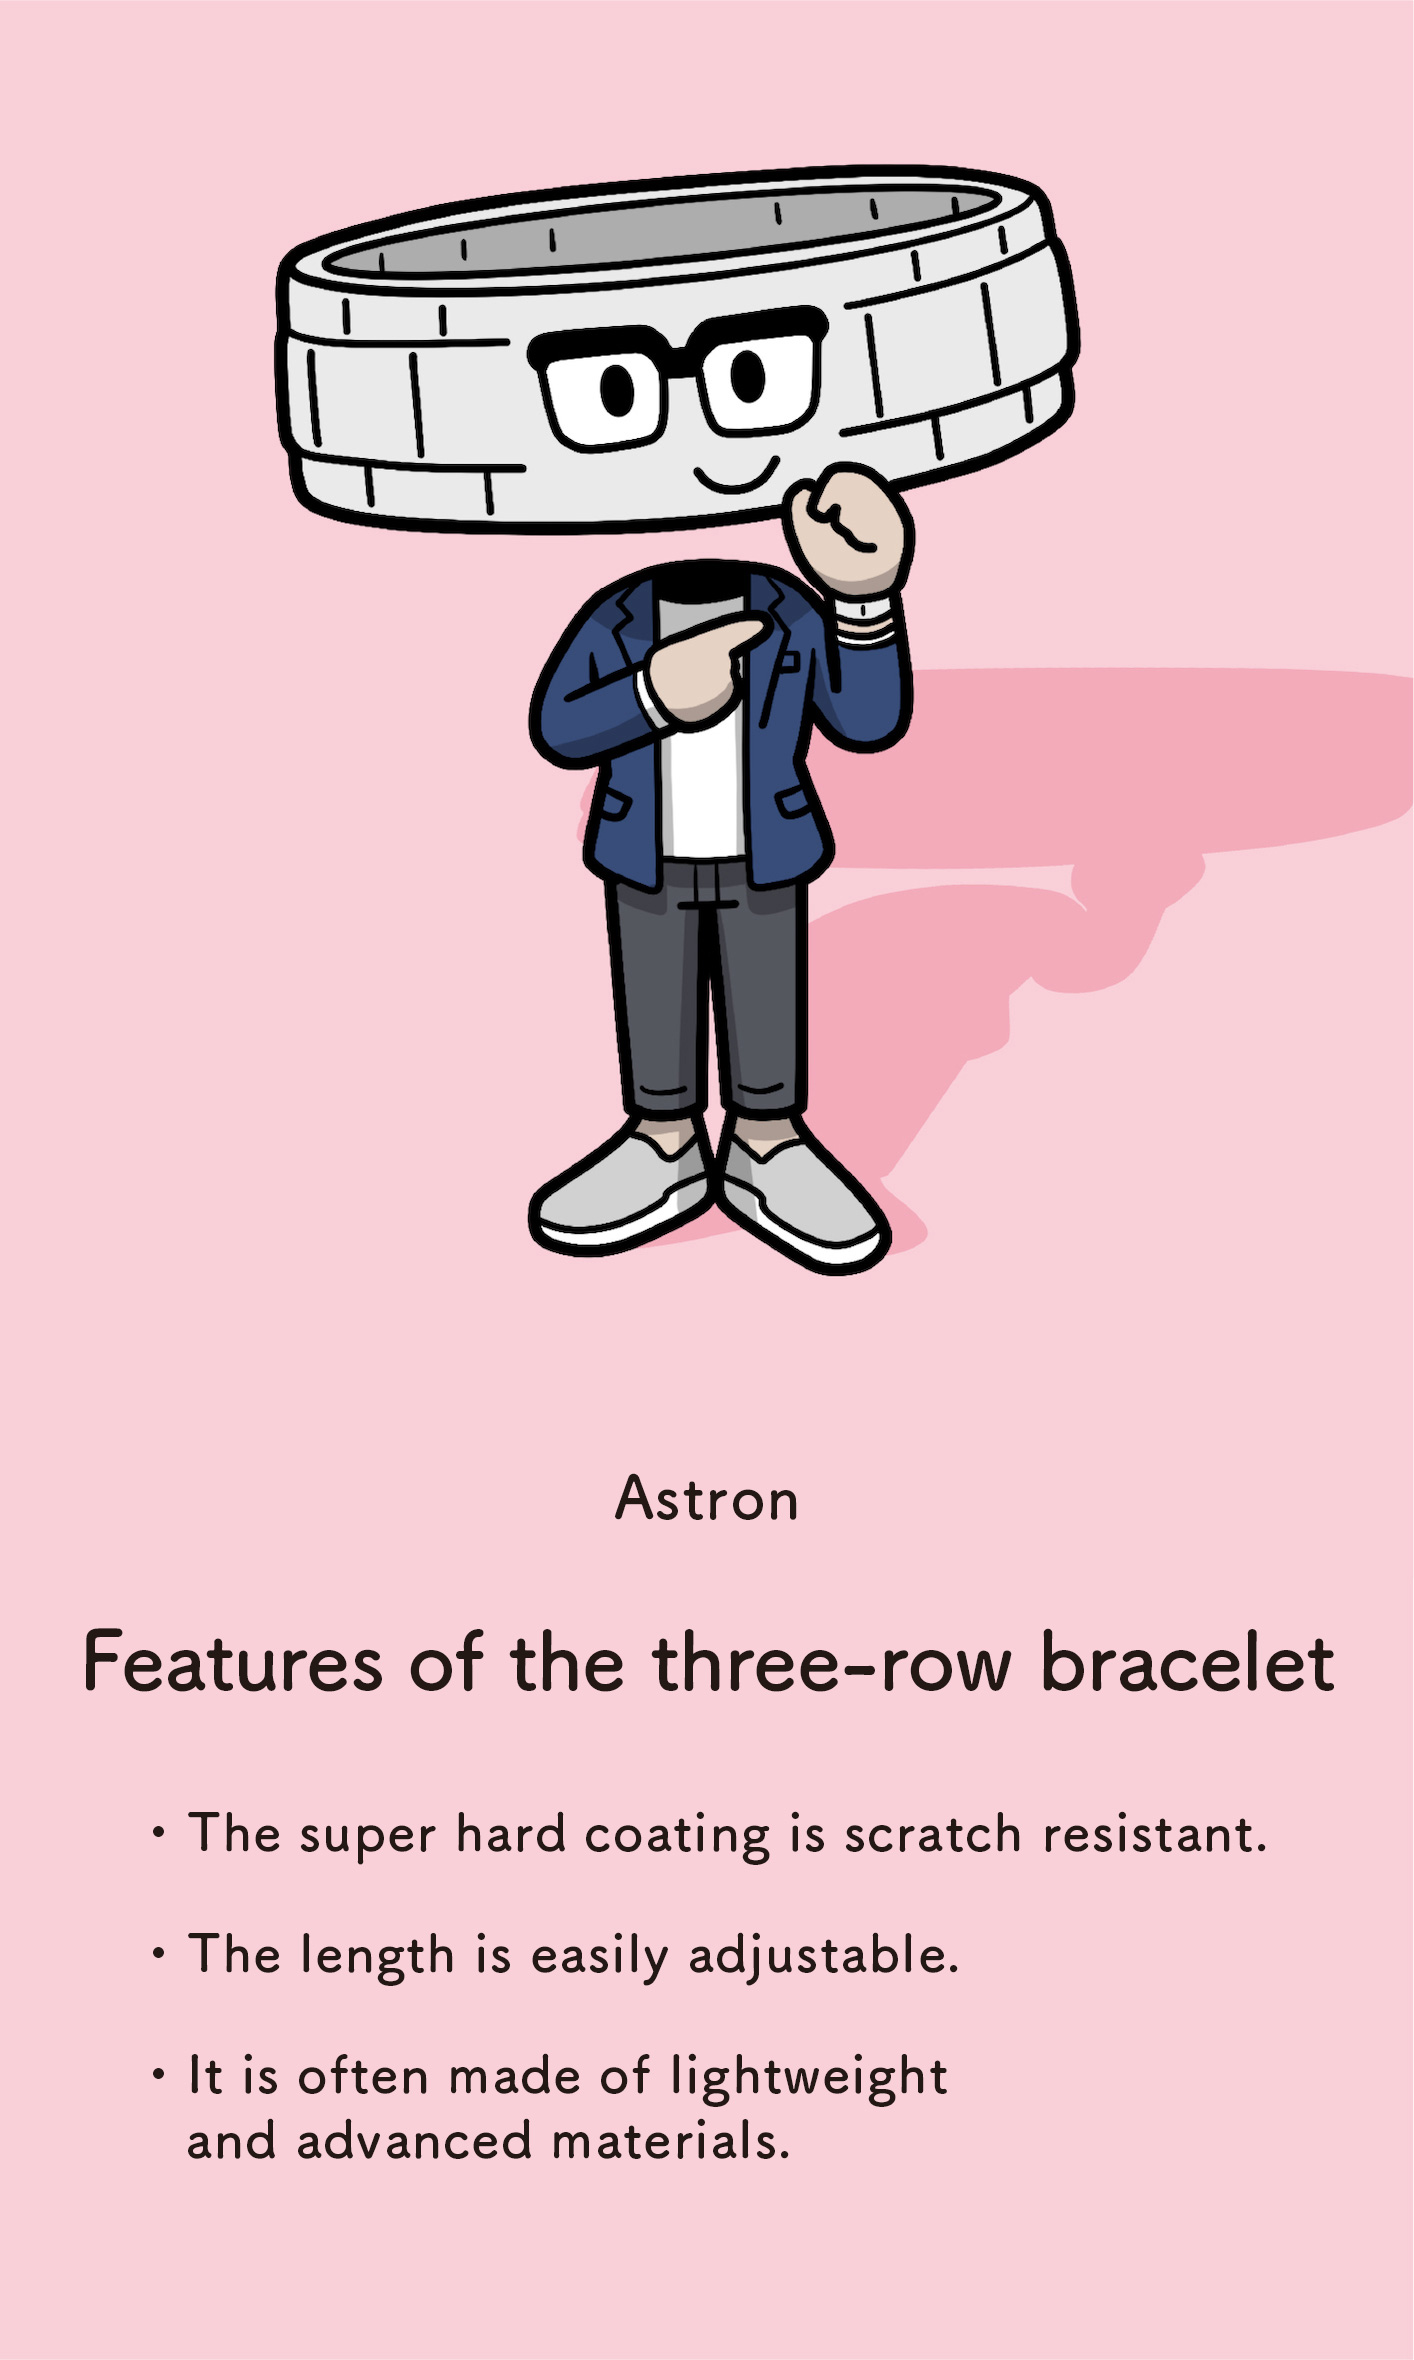 Astron: Features of the three-row bracelet - The super hard coating is scratch resistant. - The length is easily adjustable. - It is often made of lightweight and advanced materials.